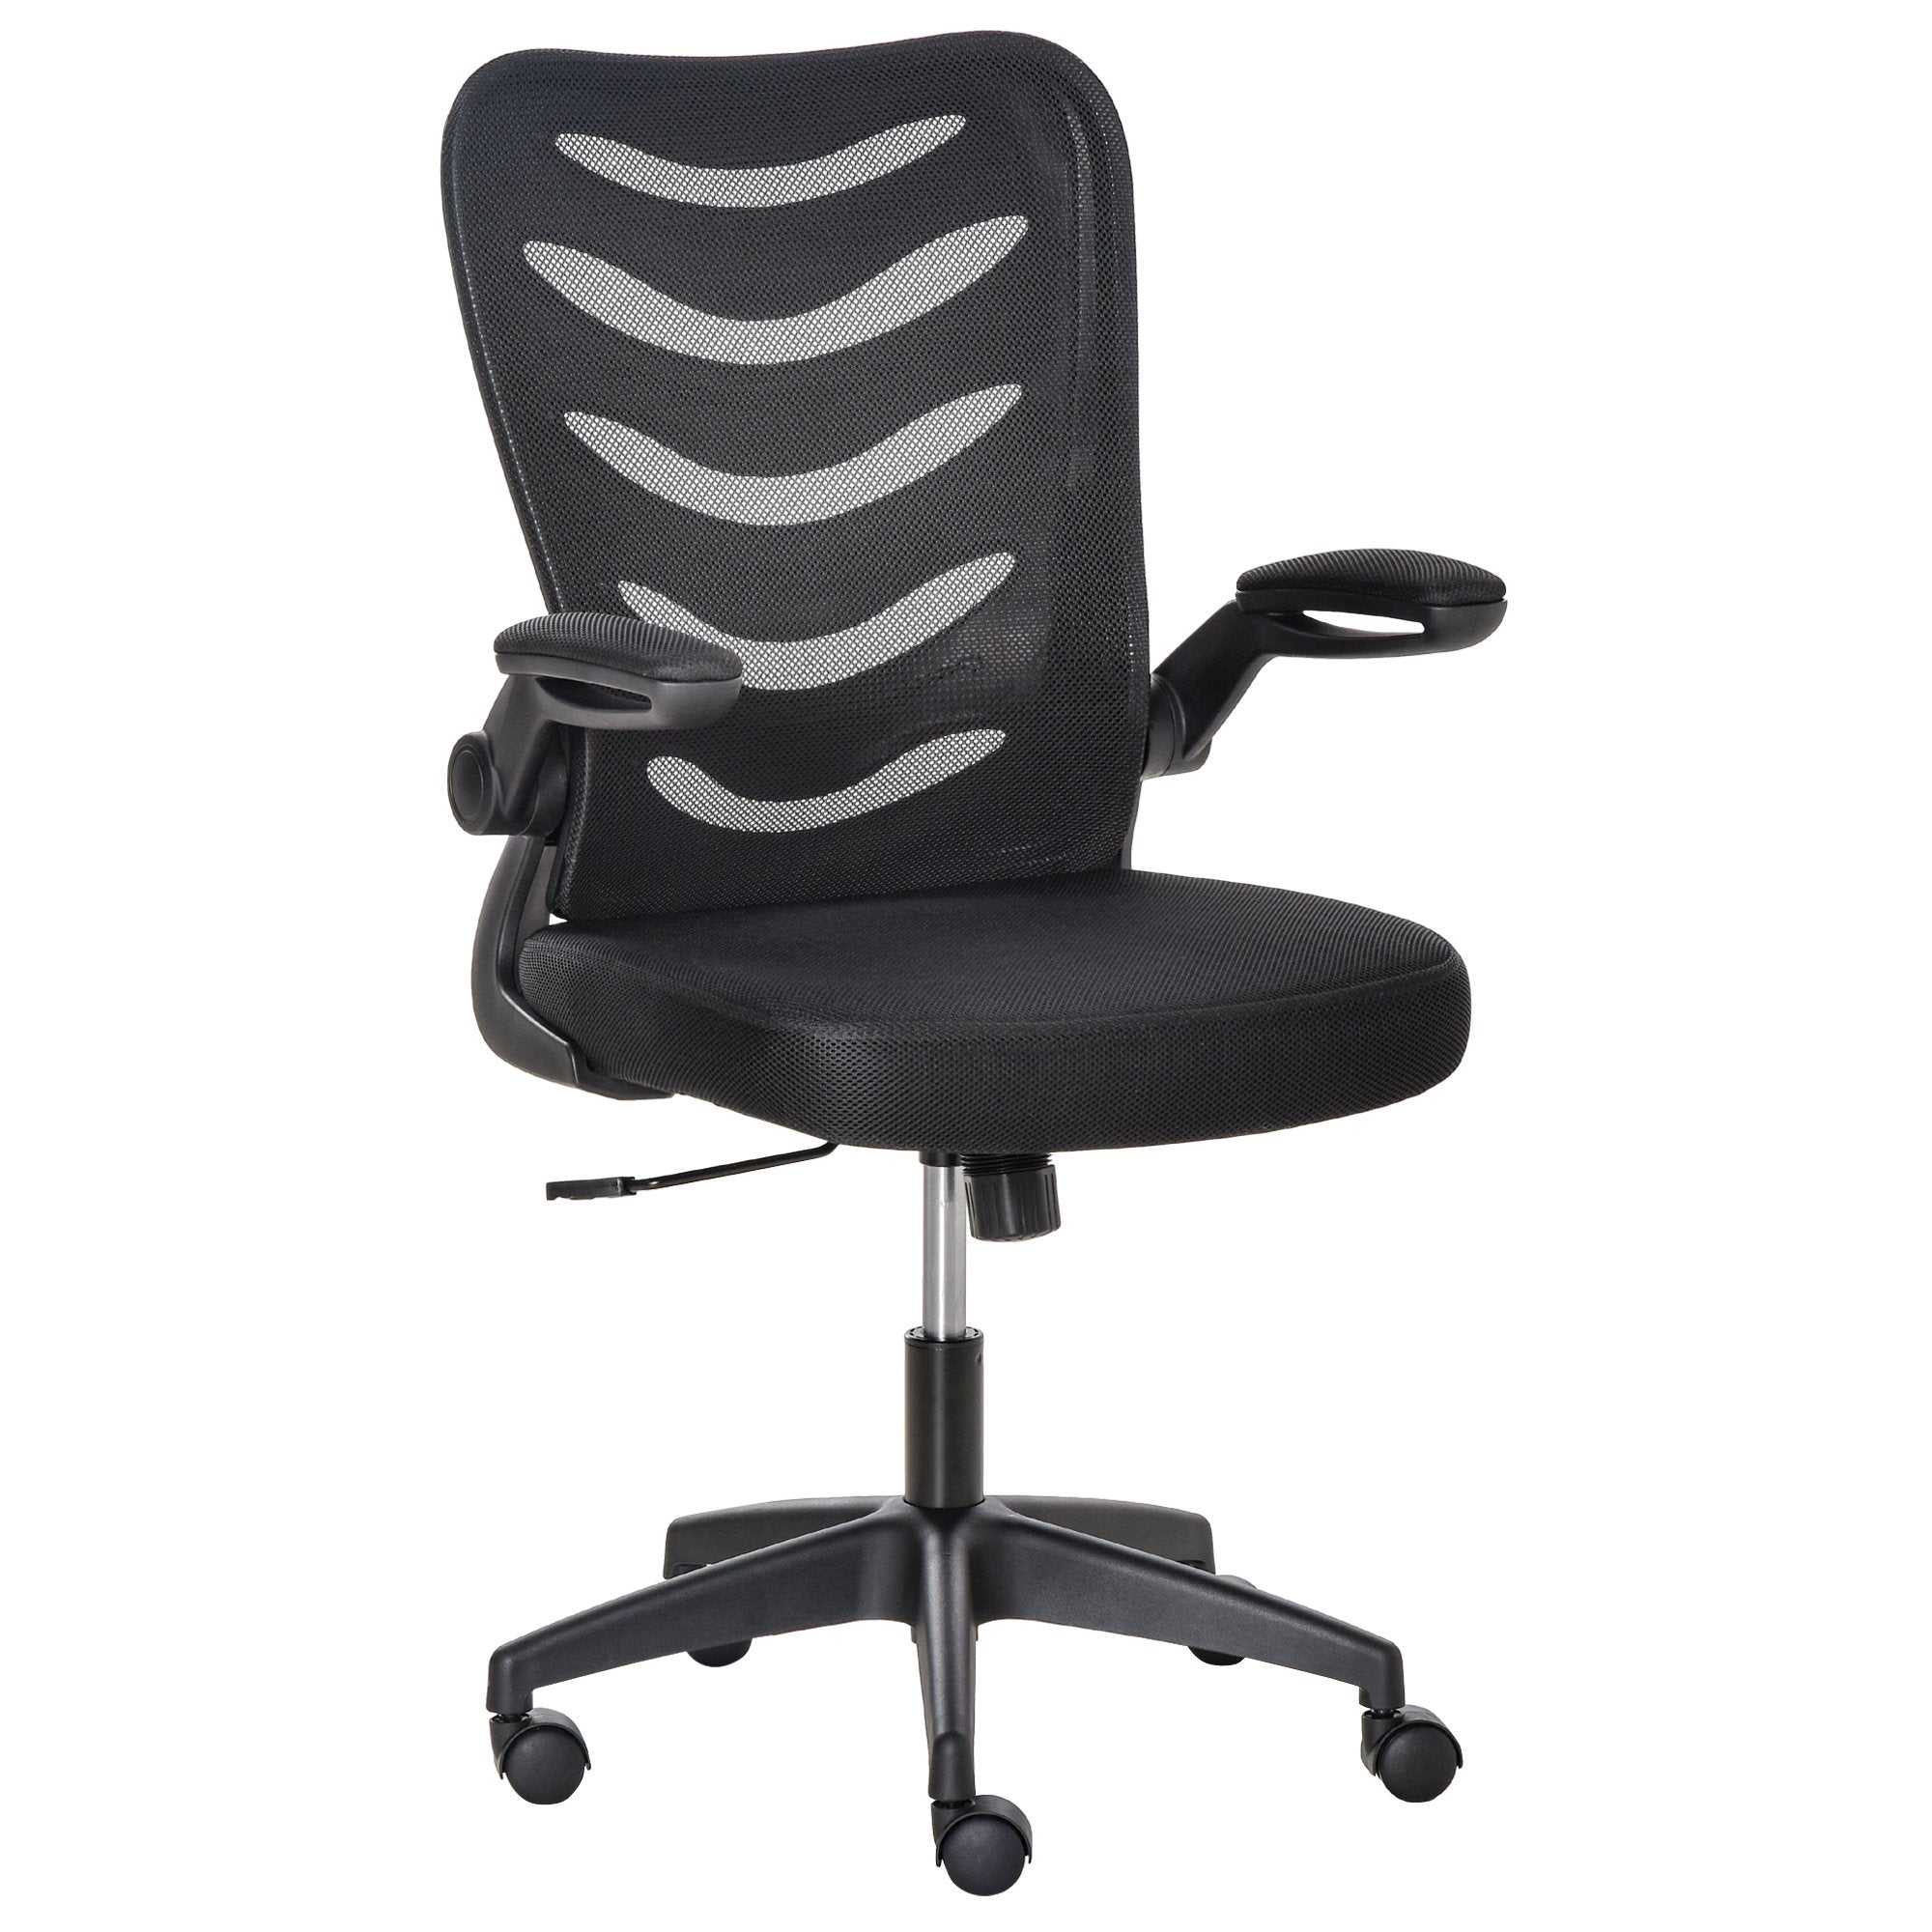 Vinsetto Mesh Office Chair for Home Swivel Task Desk Chair with Lumbar Back Support Flip-Up Arm Adjustable Height Black Computer w/ - TJ Hughes